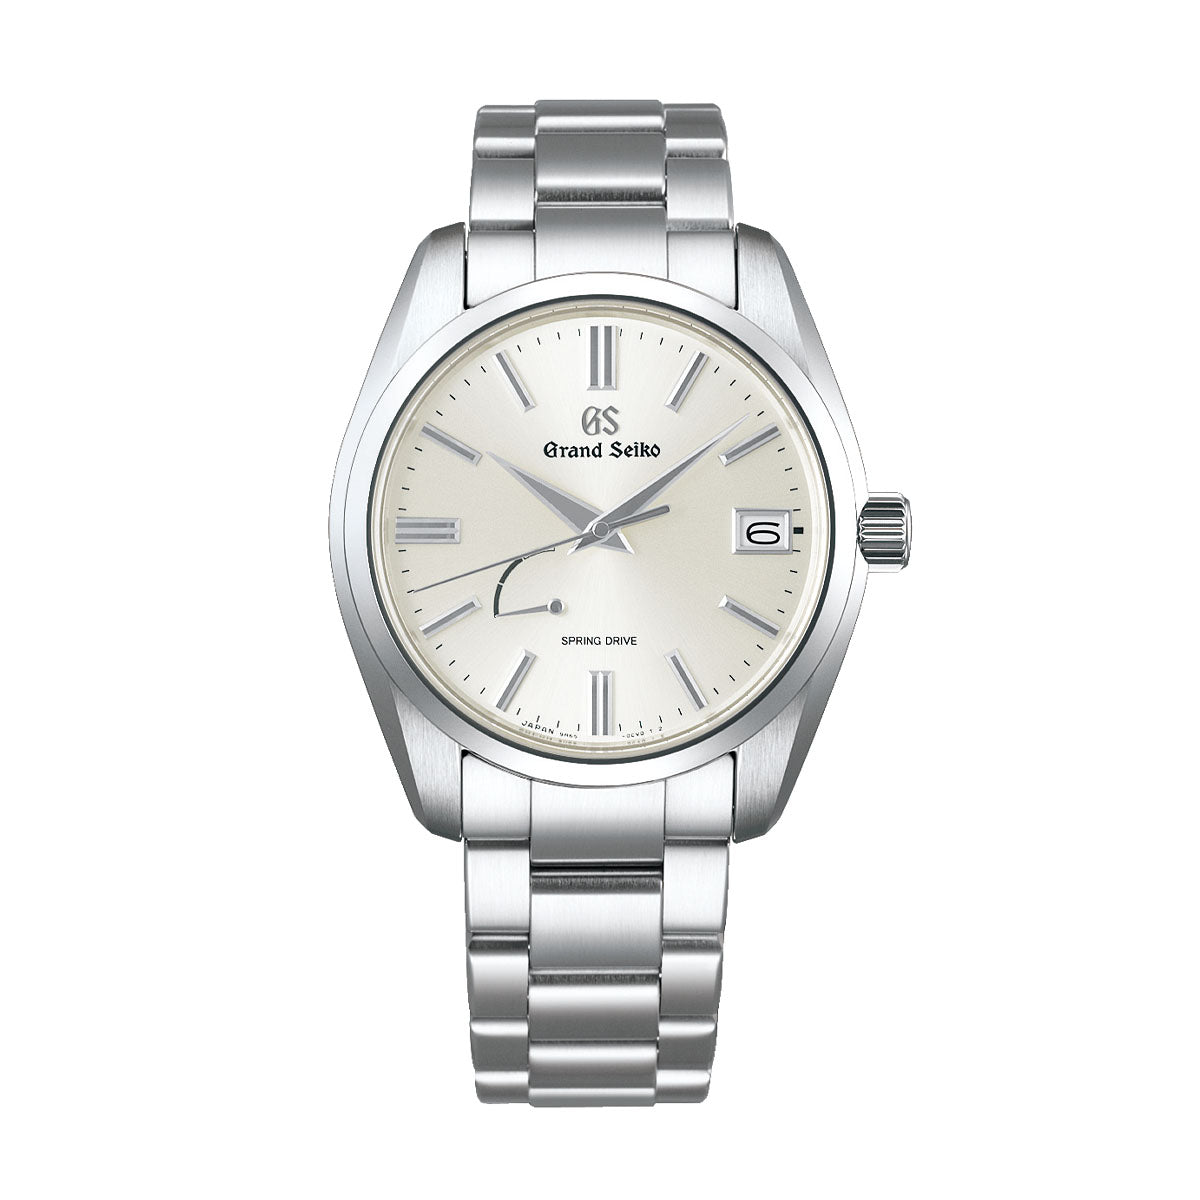 Grand Seiko Heritage Collection Spring Drive 40mm Watch